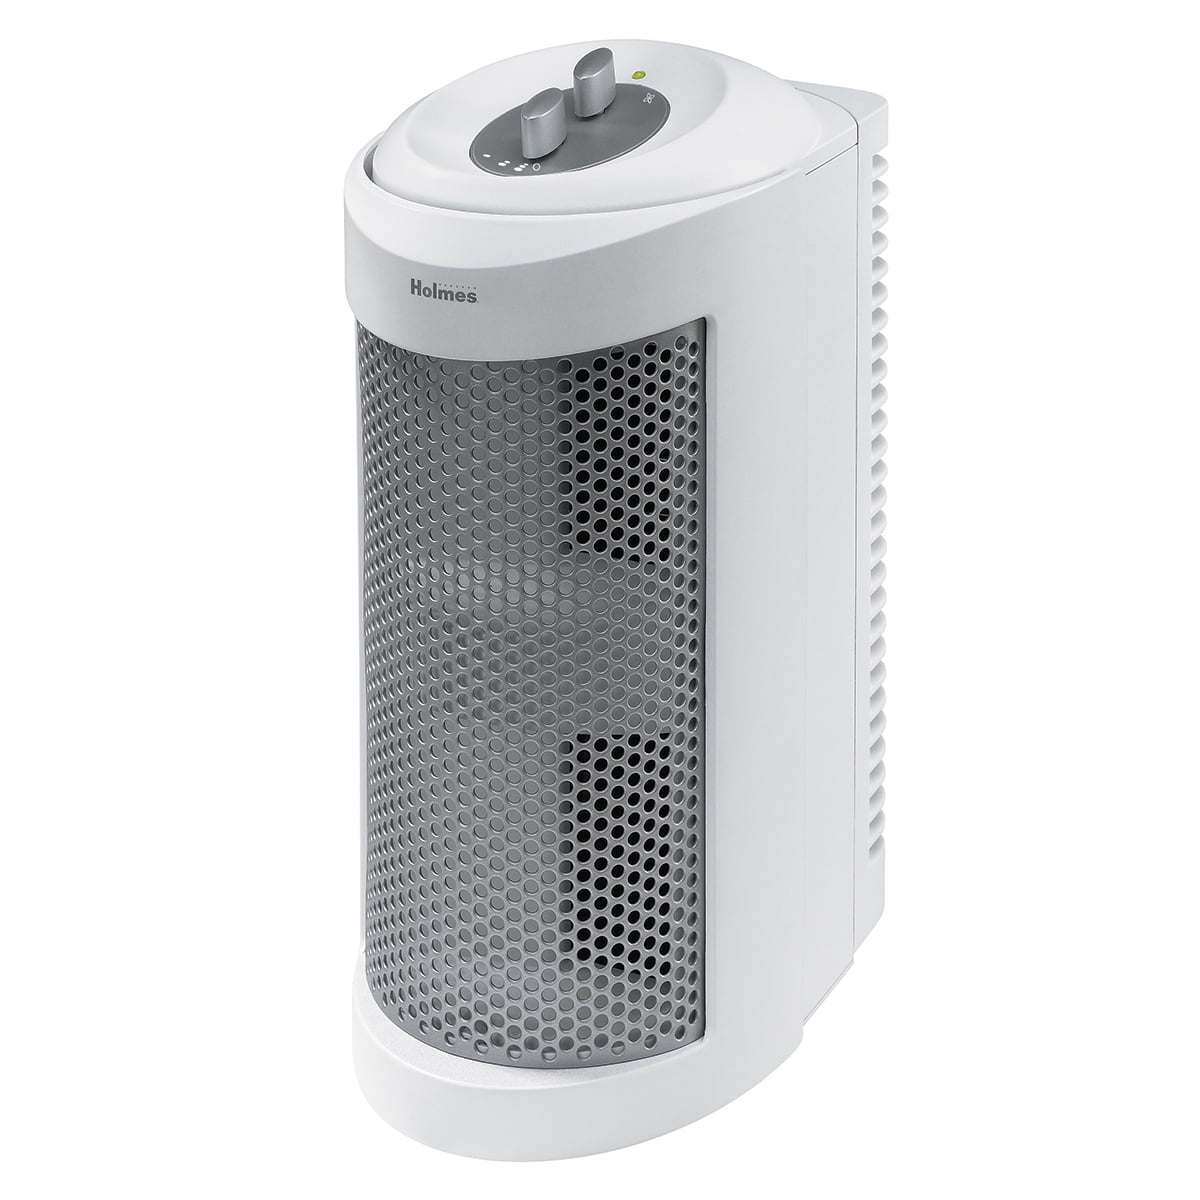 Holmes True HEPA Allergen Remover Small Space Mini Tower Air Purifier w/ Optional Ionizer (White) $16.25  + Free S&H w/ Walmart+ or $35+